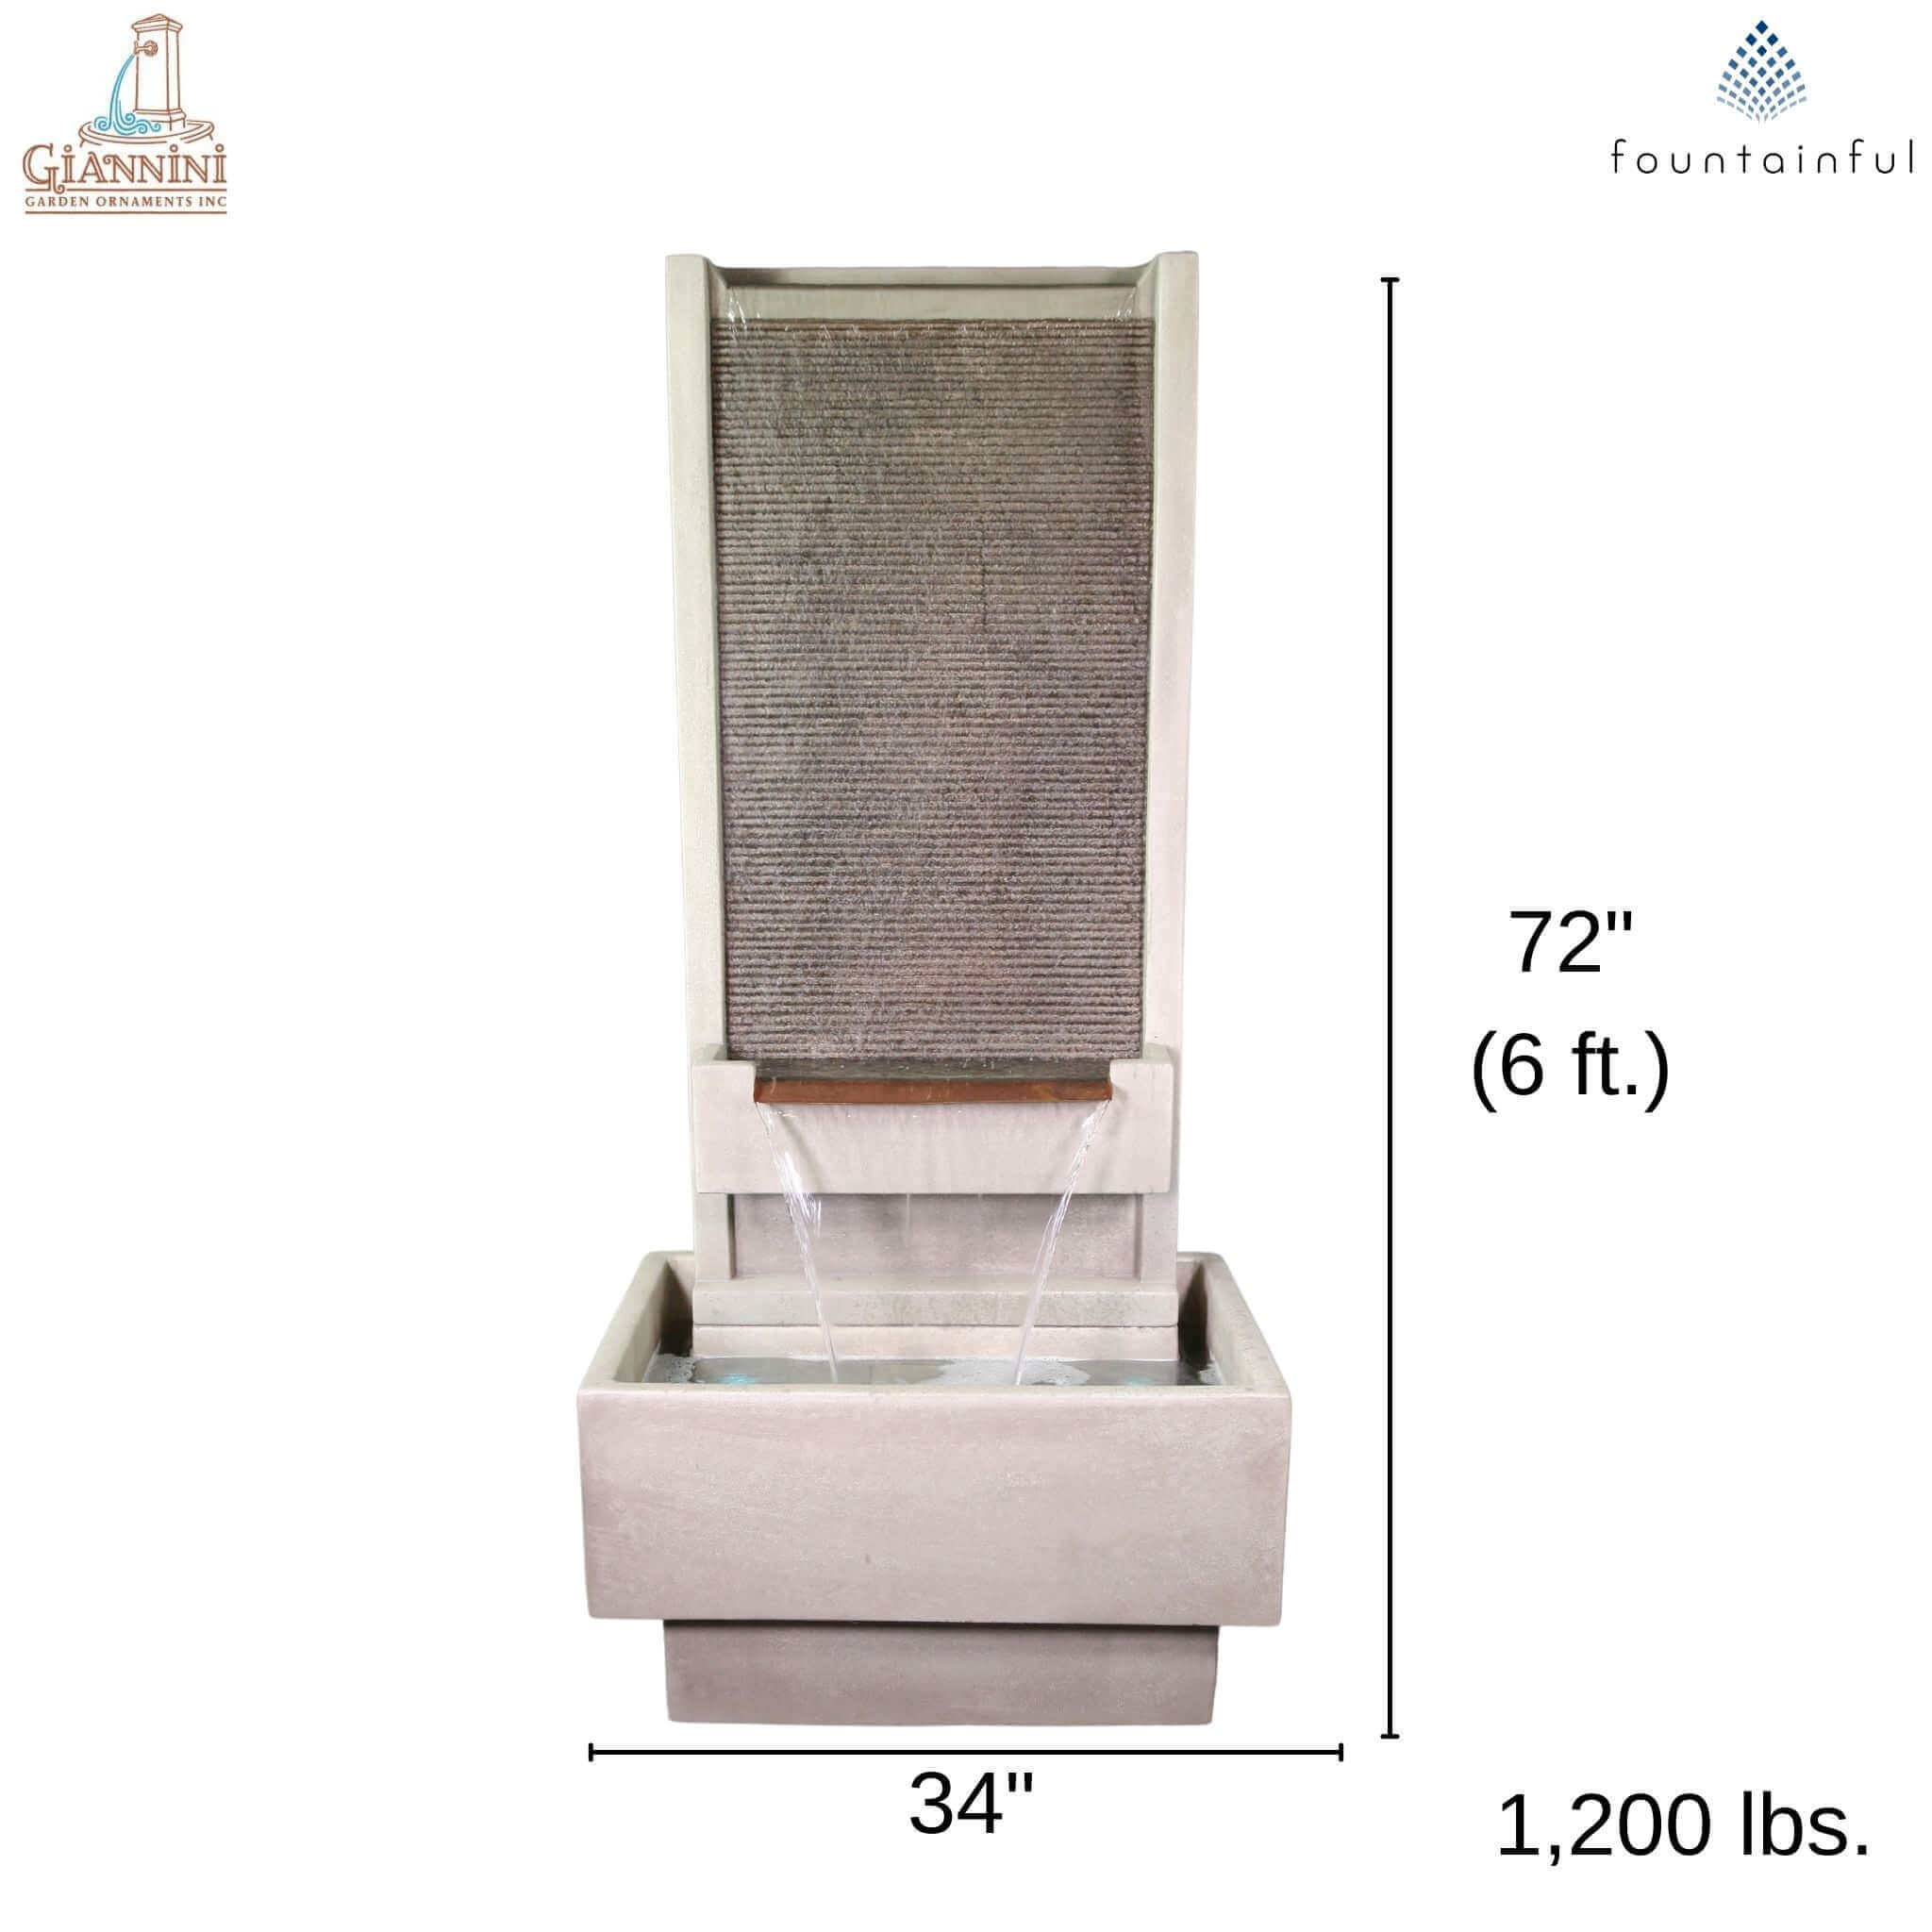 Brentwood Concrete Wall Fountain TALL - Giannini #1764